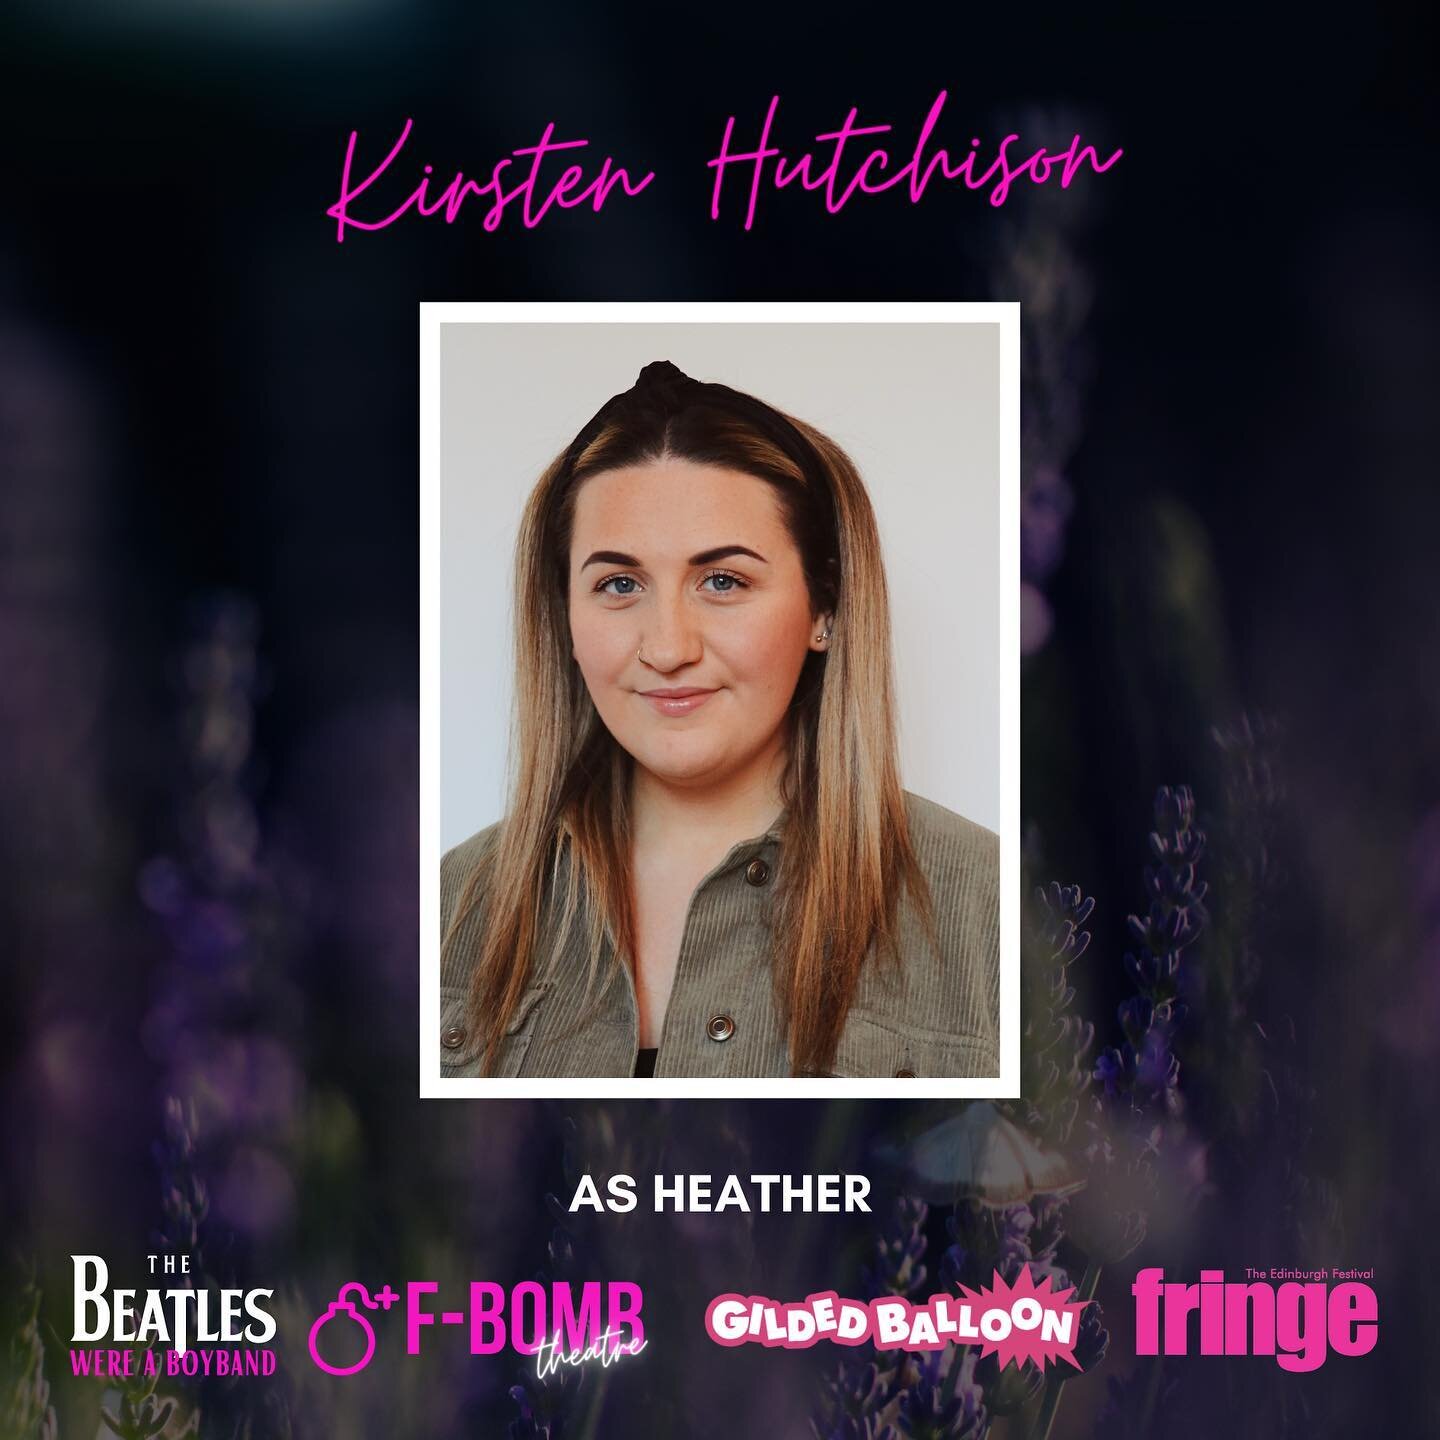 Reprising the role of Heather in THE BEATLES WERE A BOYBAND is Kirsten Hutchison 🤍

Growing up in Glasgow, @kirstenhutchisonn has been closely involved with Scottish Youth Theatre, Cumbernauld Theatre and Dundee Rep. She recently graduated from Napi